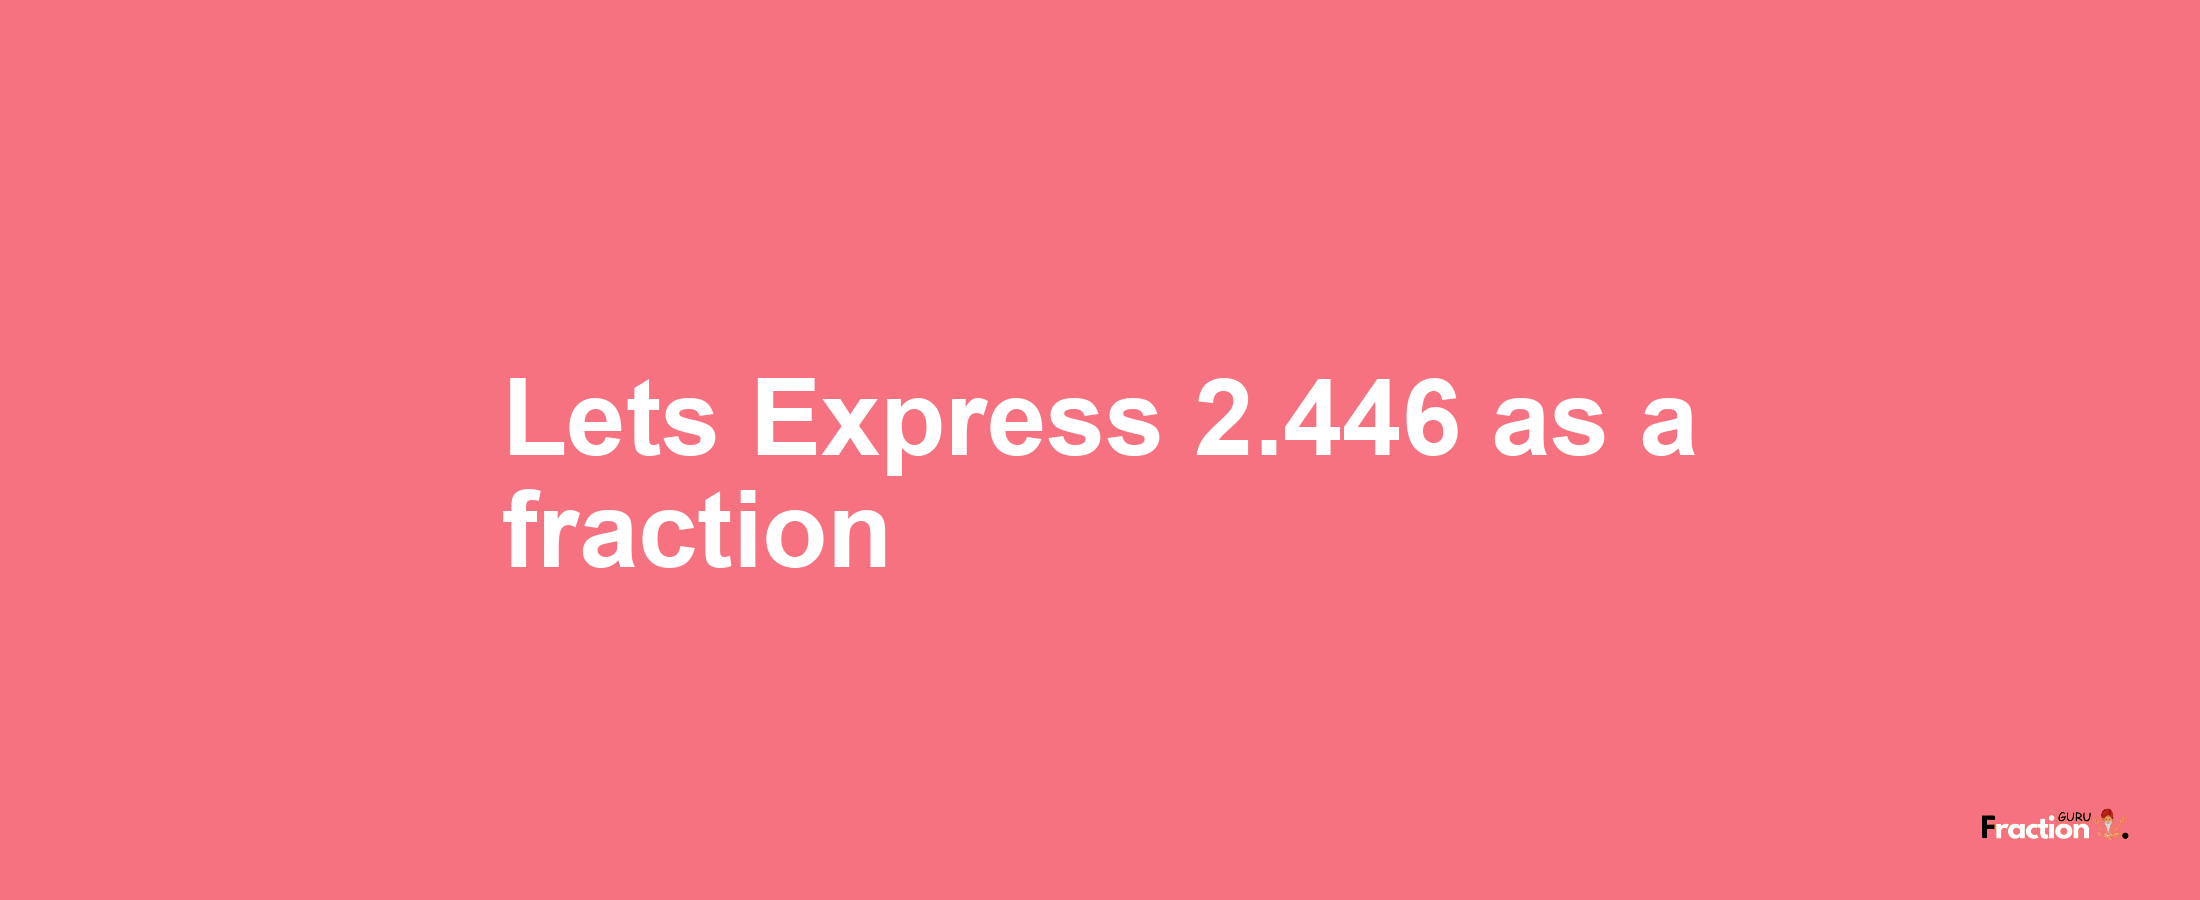 Lets Express 2.446 as afraction